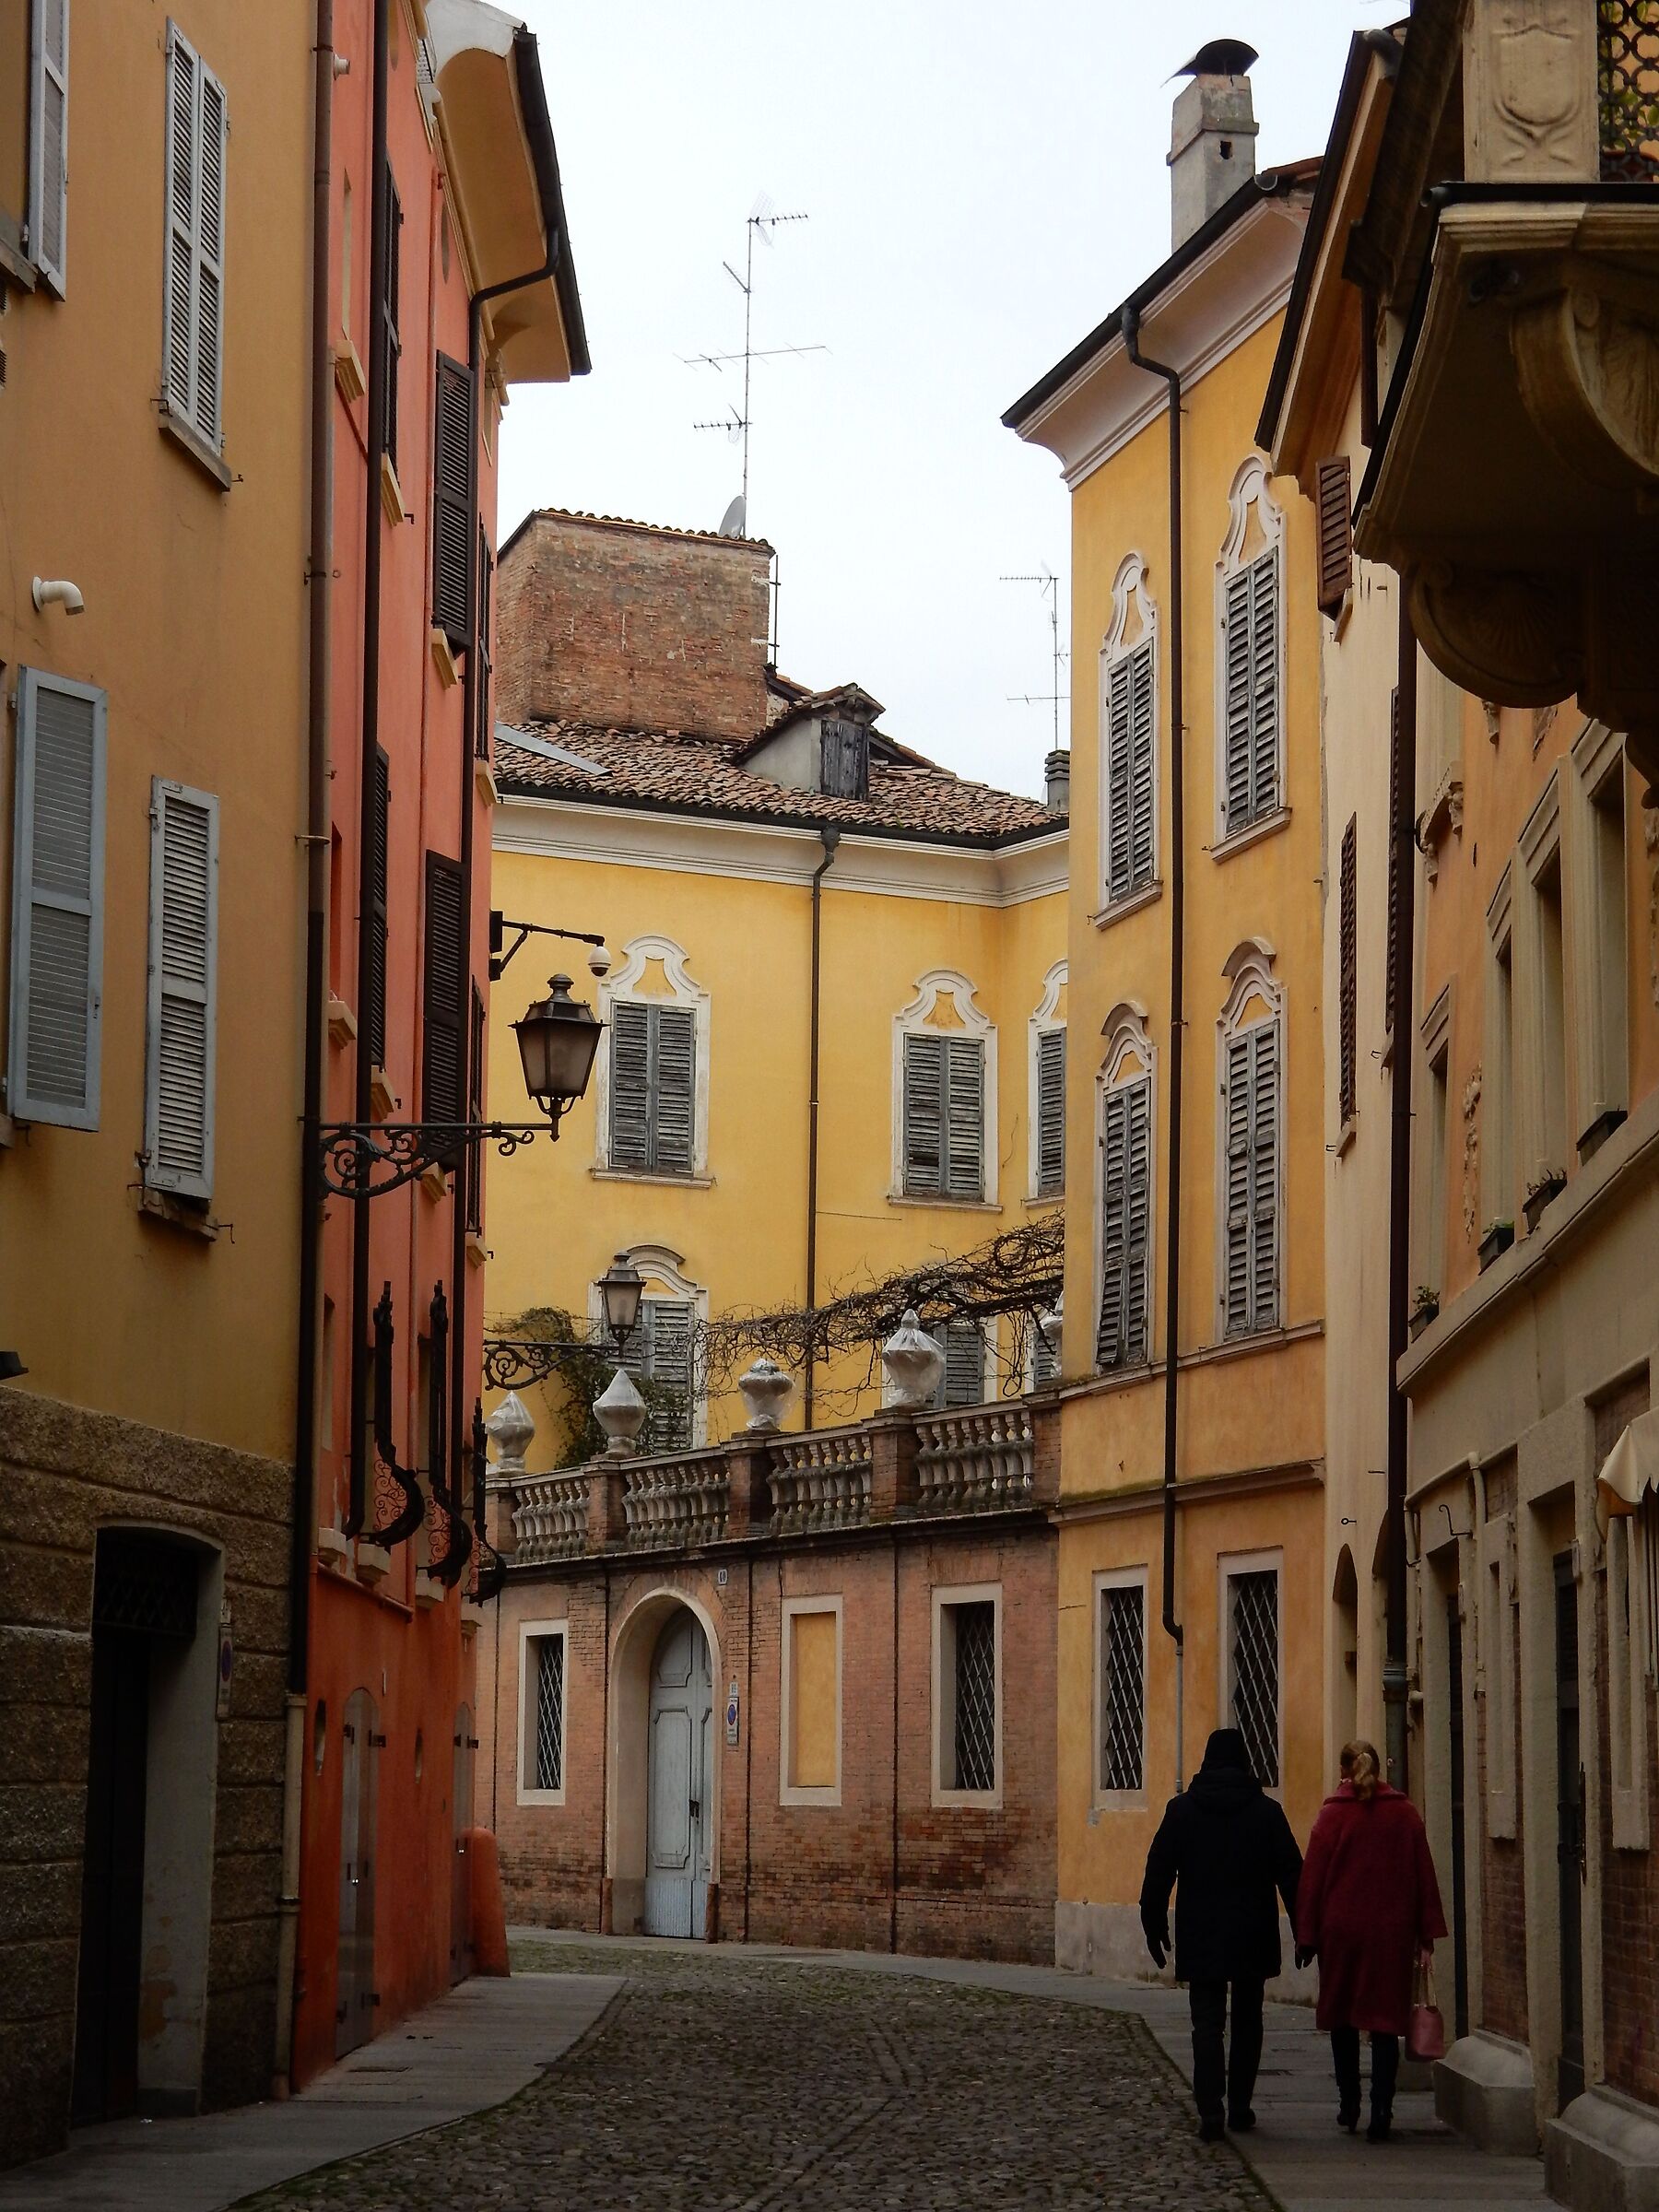 At dawn in the streets of Modena...